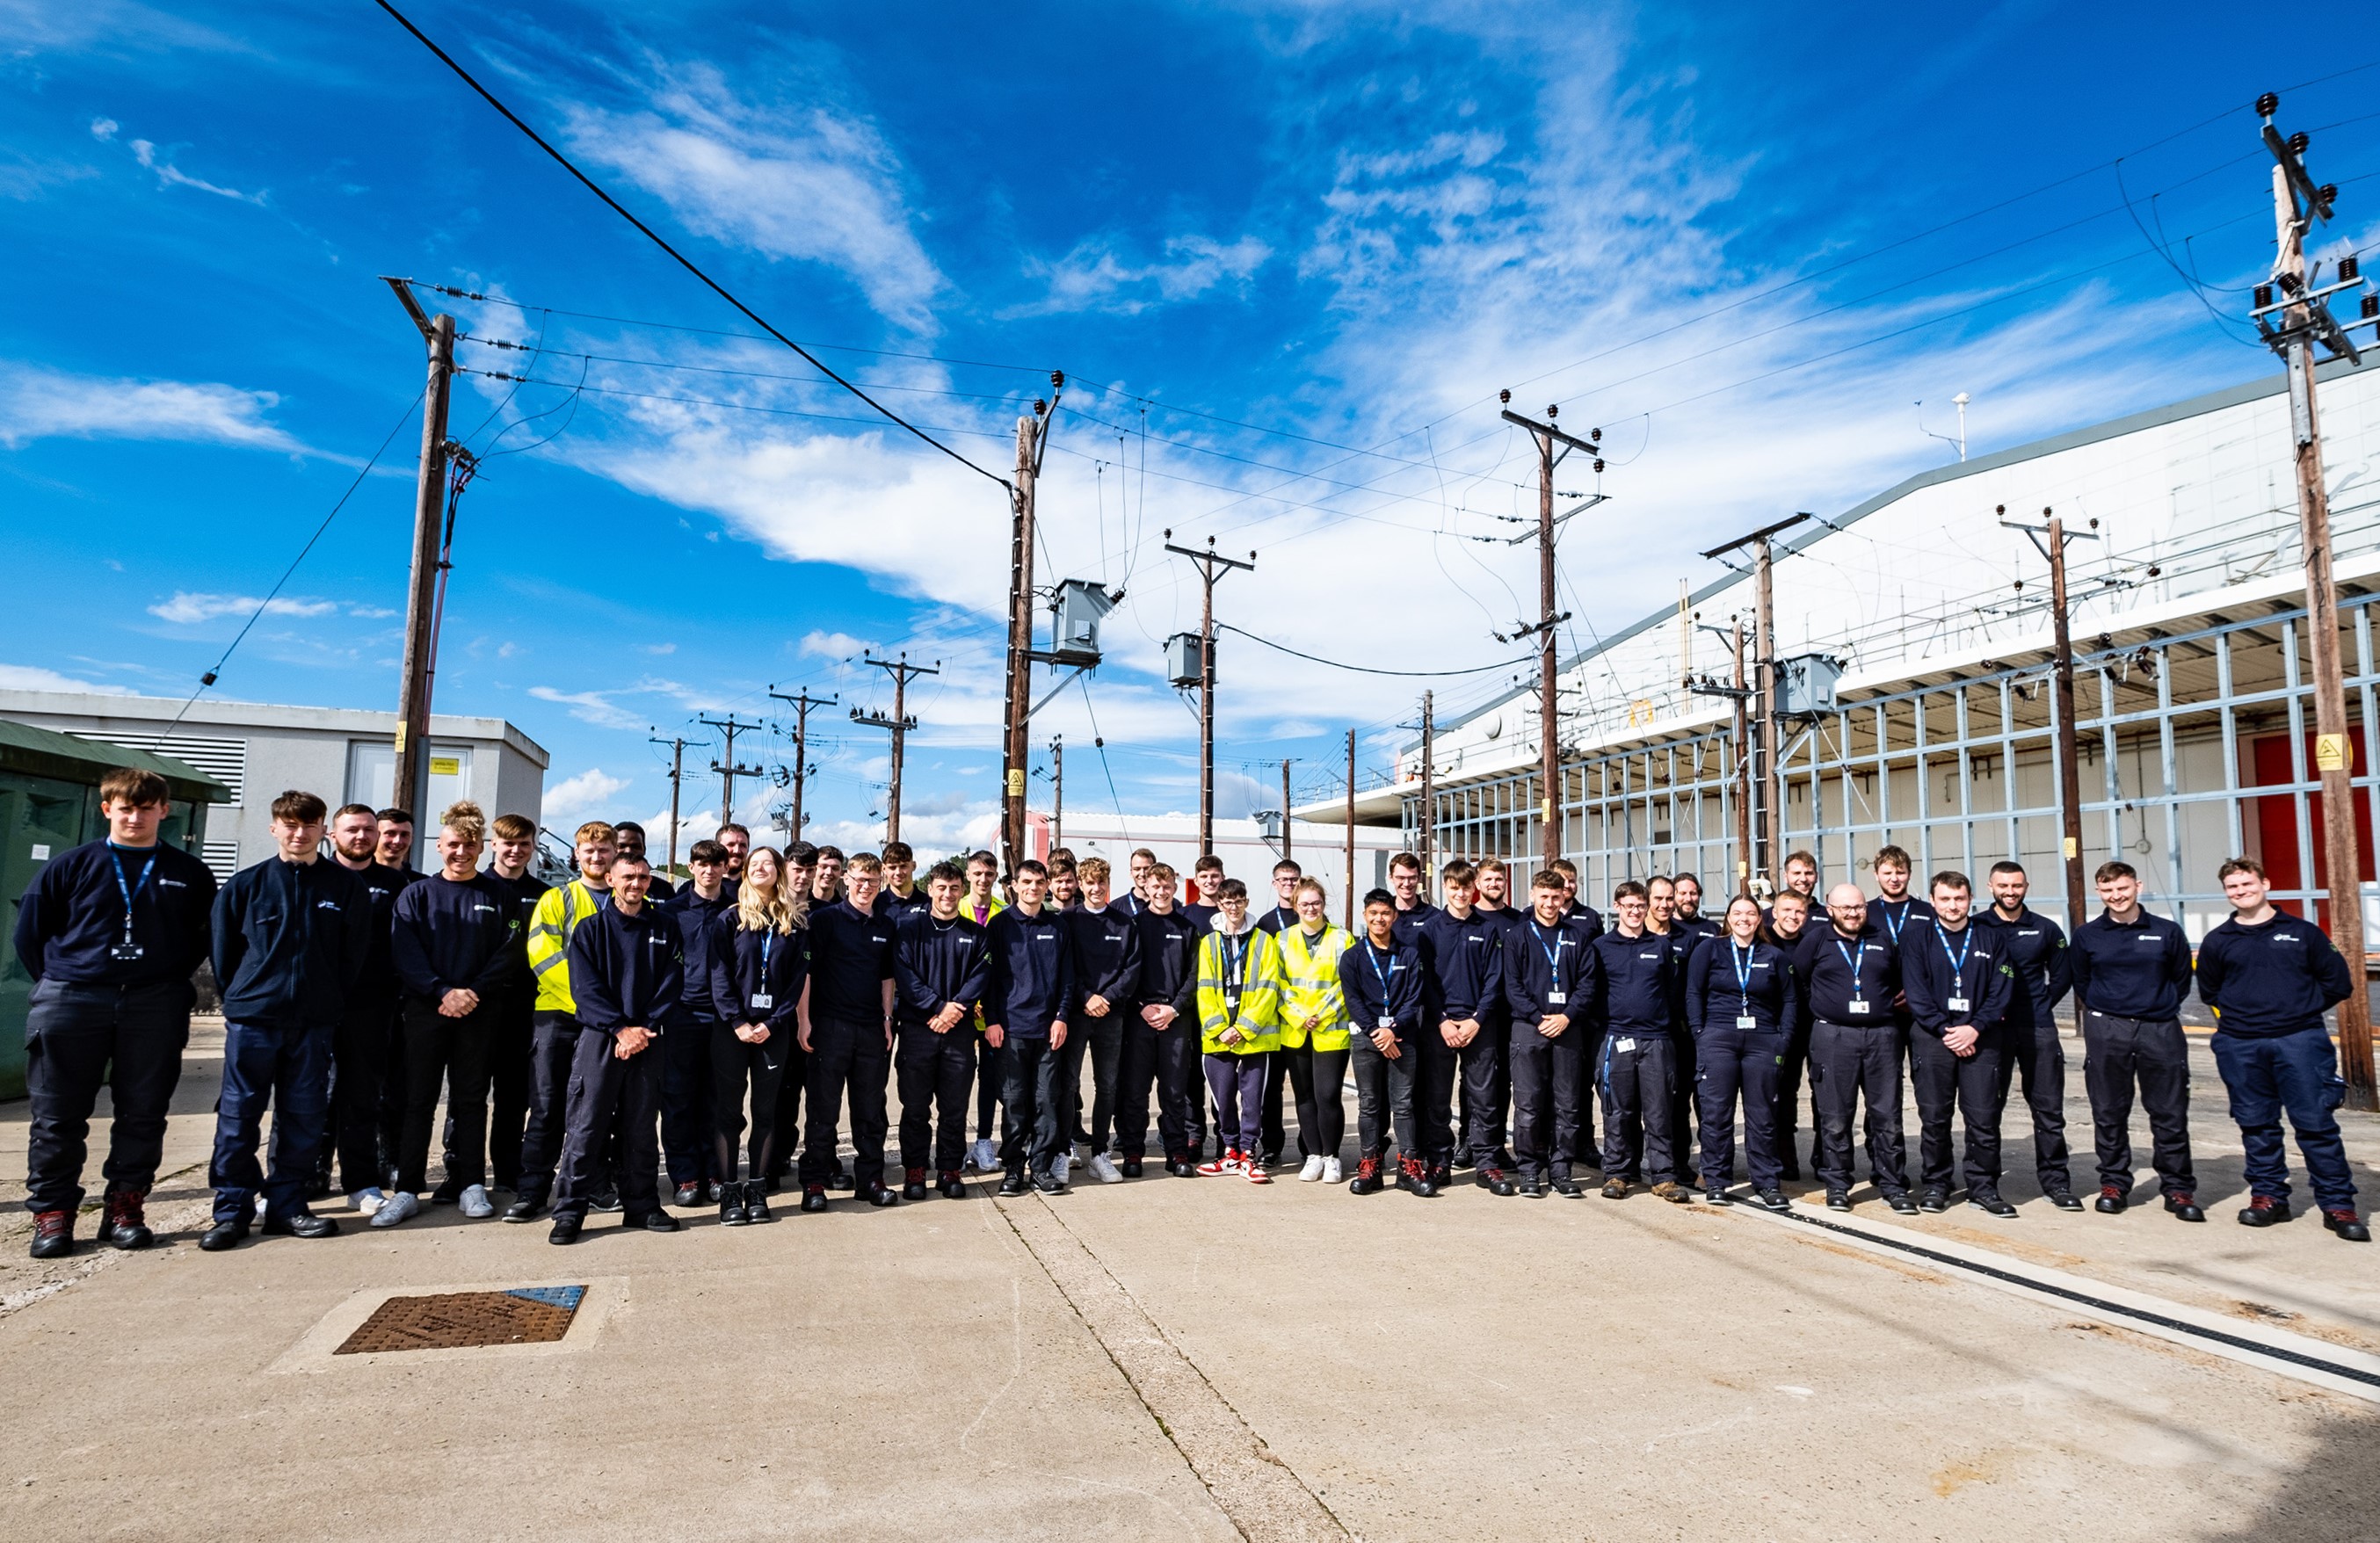 Group of apprentices standing outside in front of electricity network